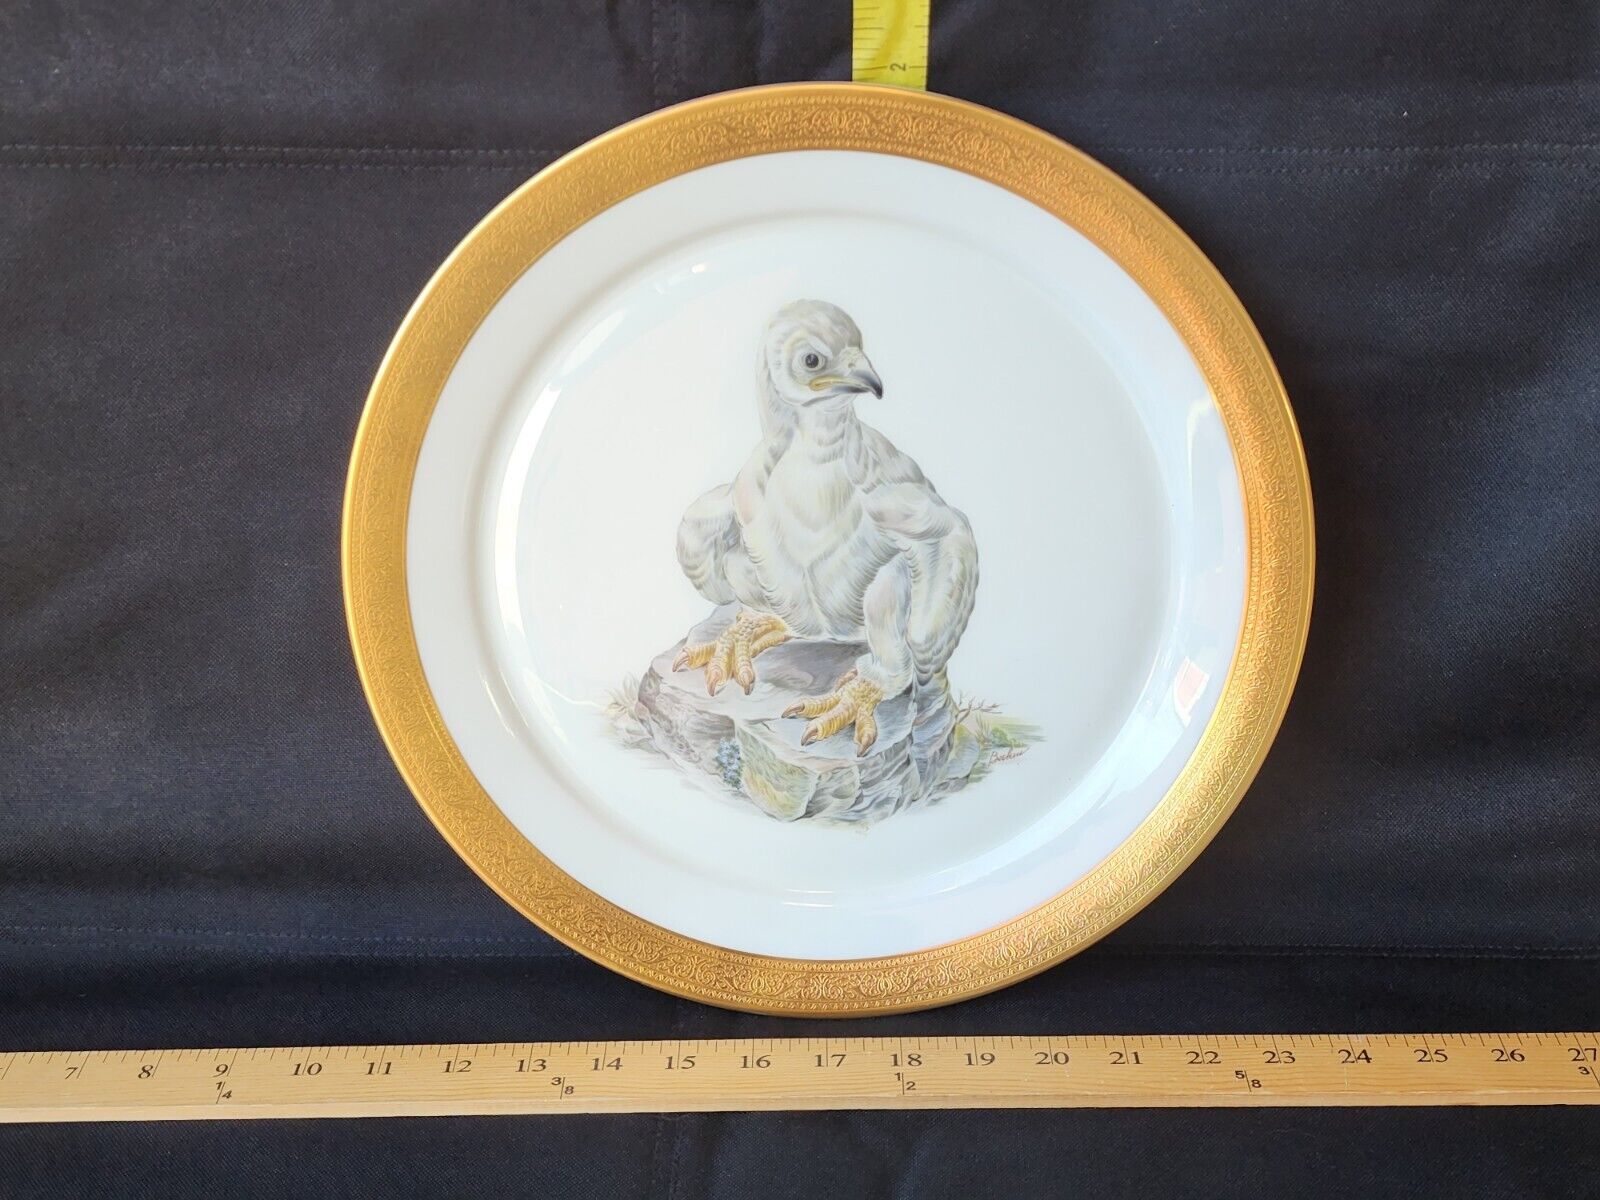 Young American Bald Eagle 13” Plate by Edward Marshall Boehm 1973 Limited Issue